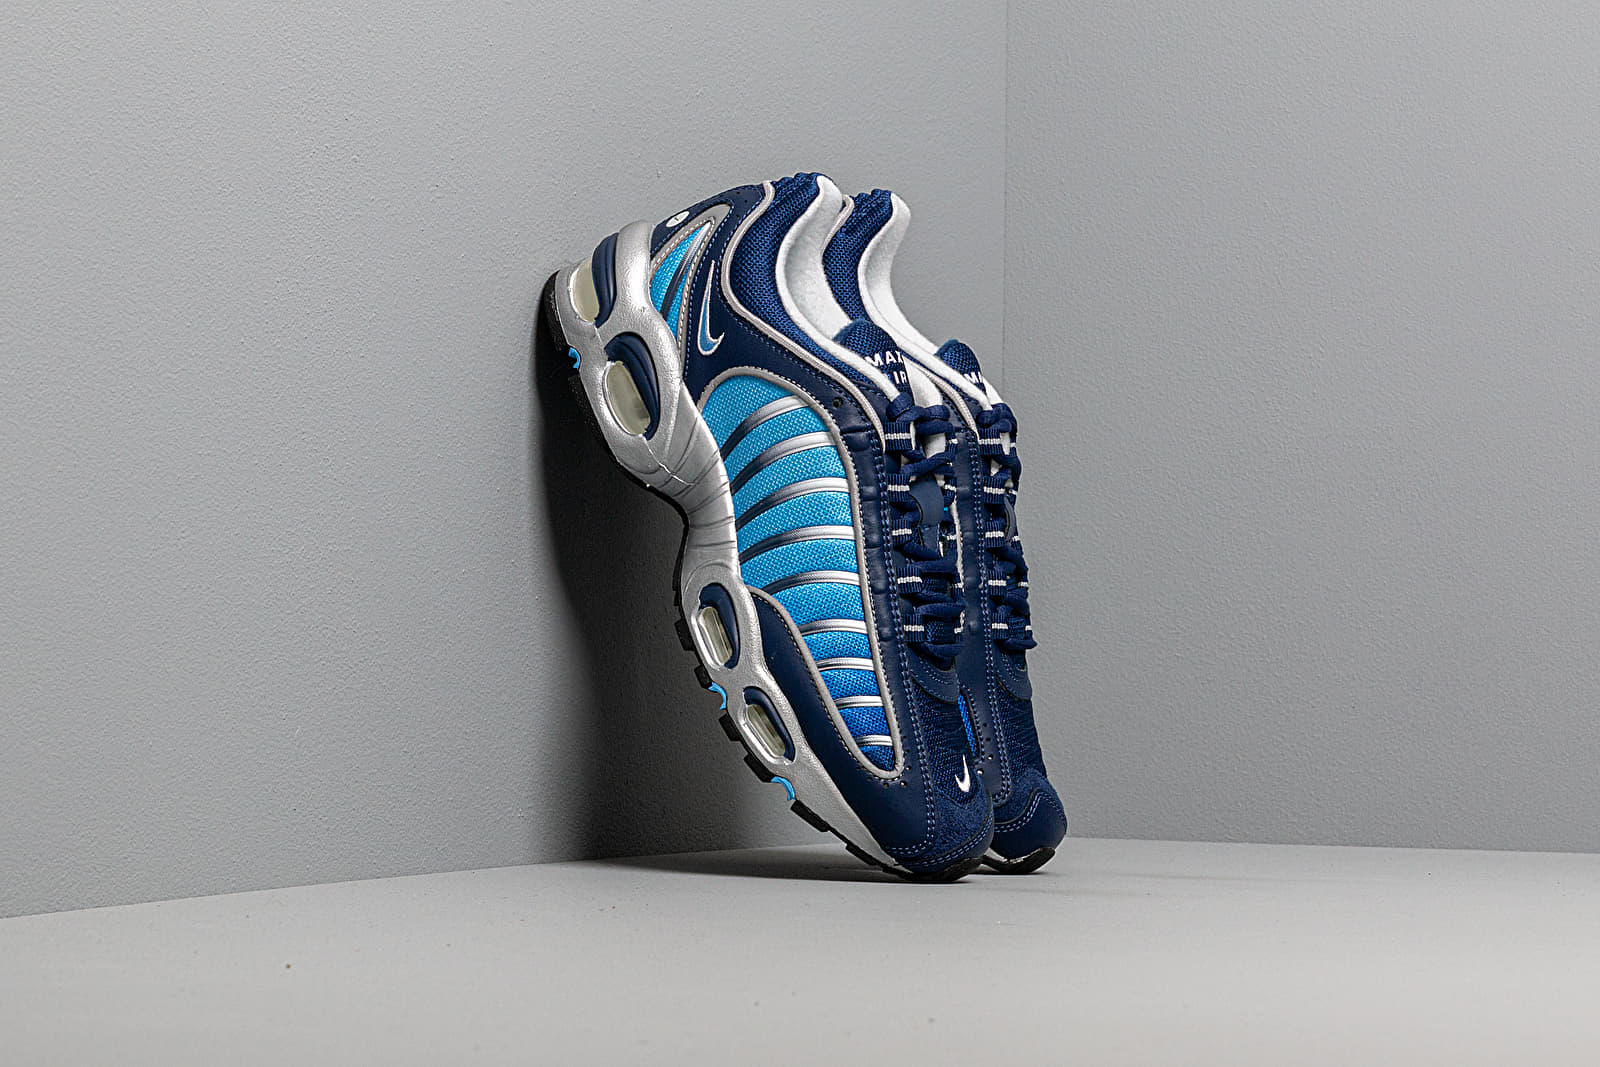 Chaussures et baskets homme Nike Air Max Tailwind IV Blue Void/ University Blue-White-Black